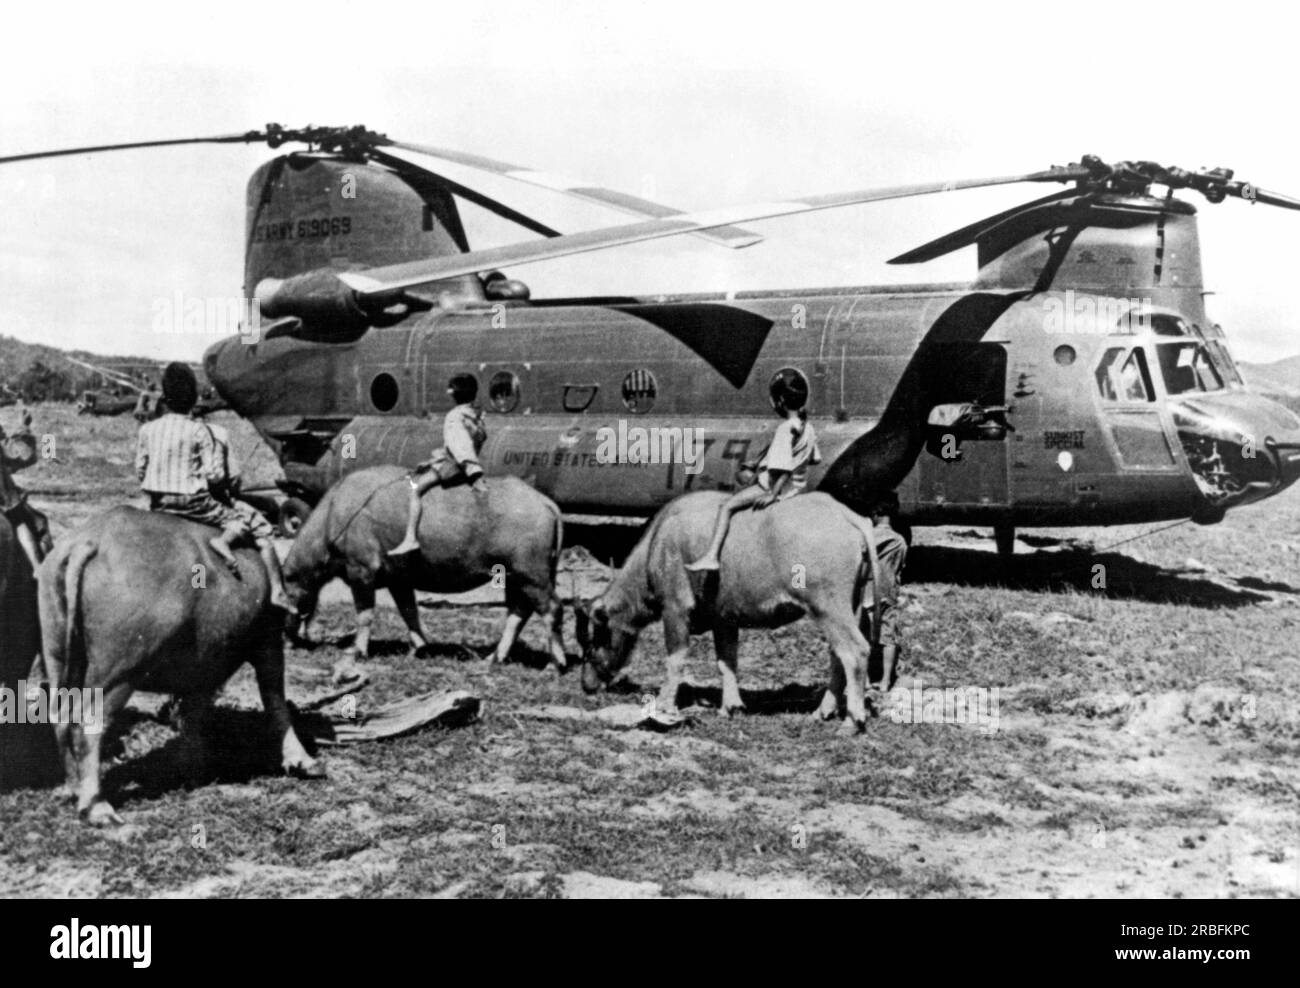 Nha Trang, Vietnam:  February 20, 1968 A U.S. Army CH-47 Chinook helicopter in a field meets up with several Vietnamese boys riding their water buffalos to nearby rice paddies. Stock Photo